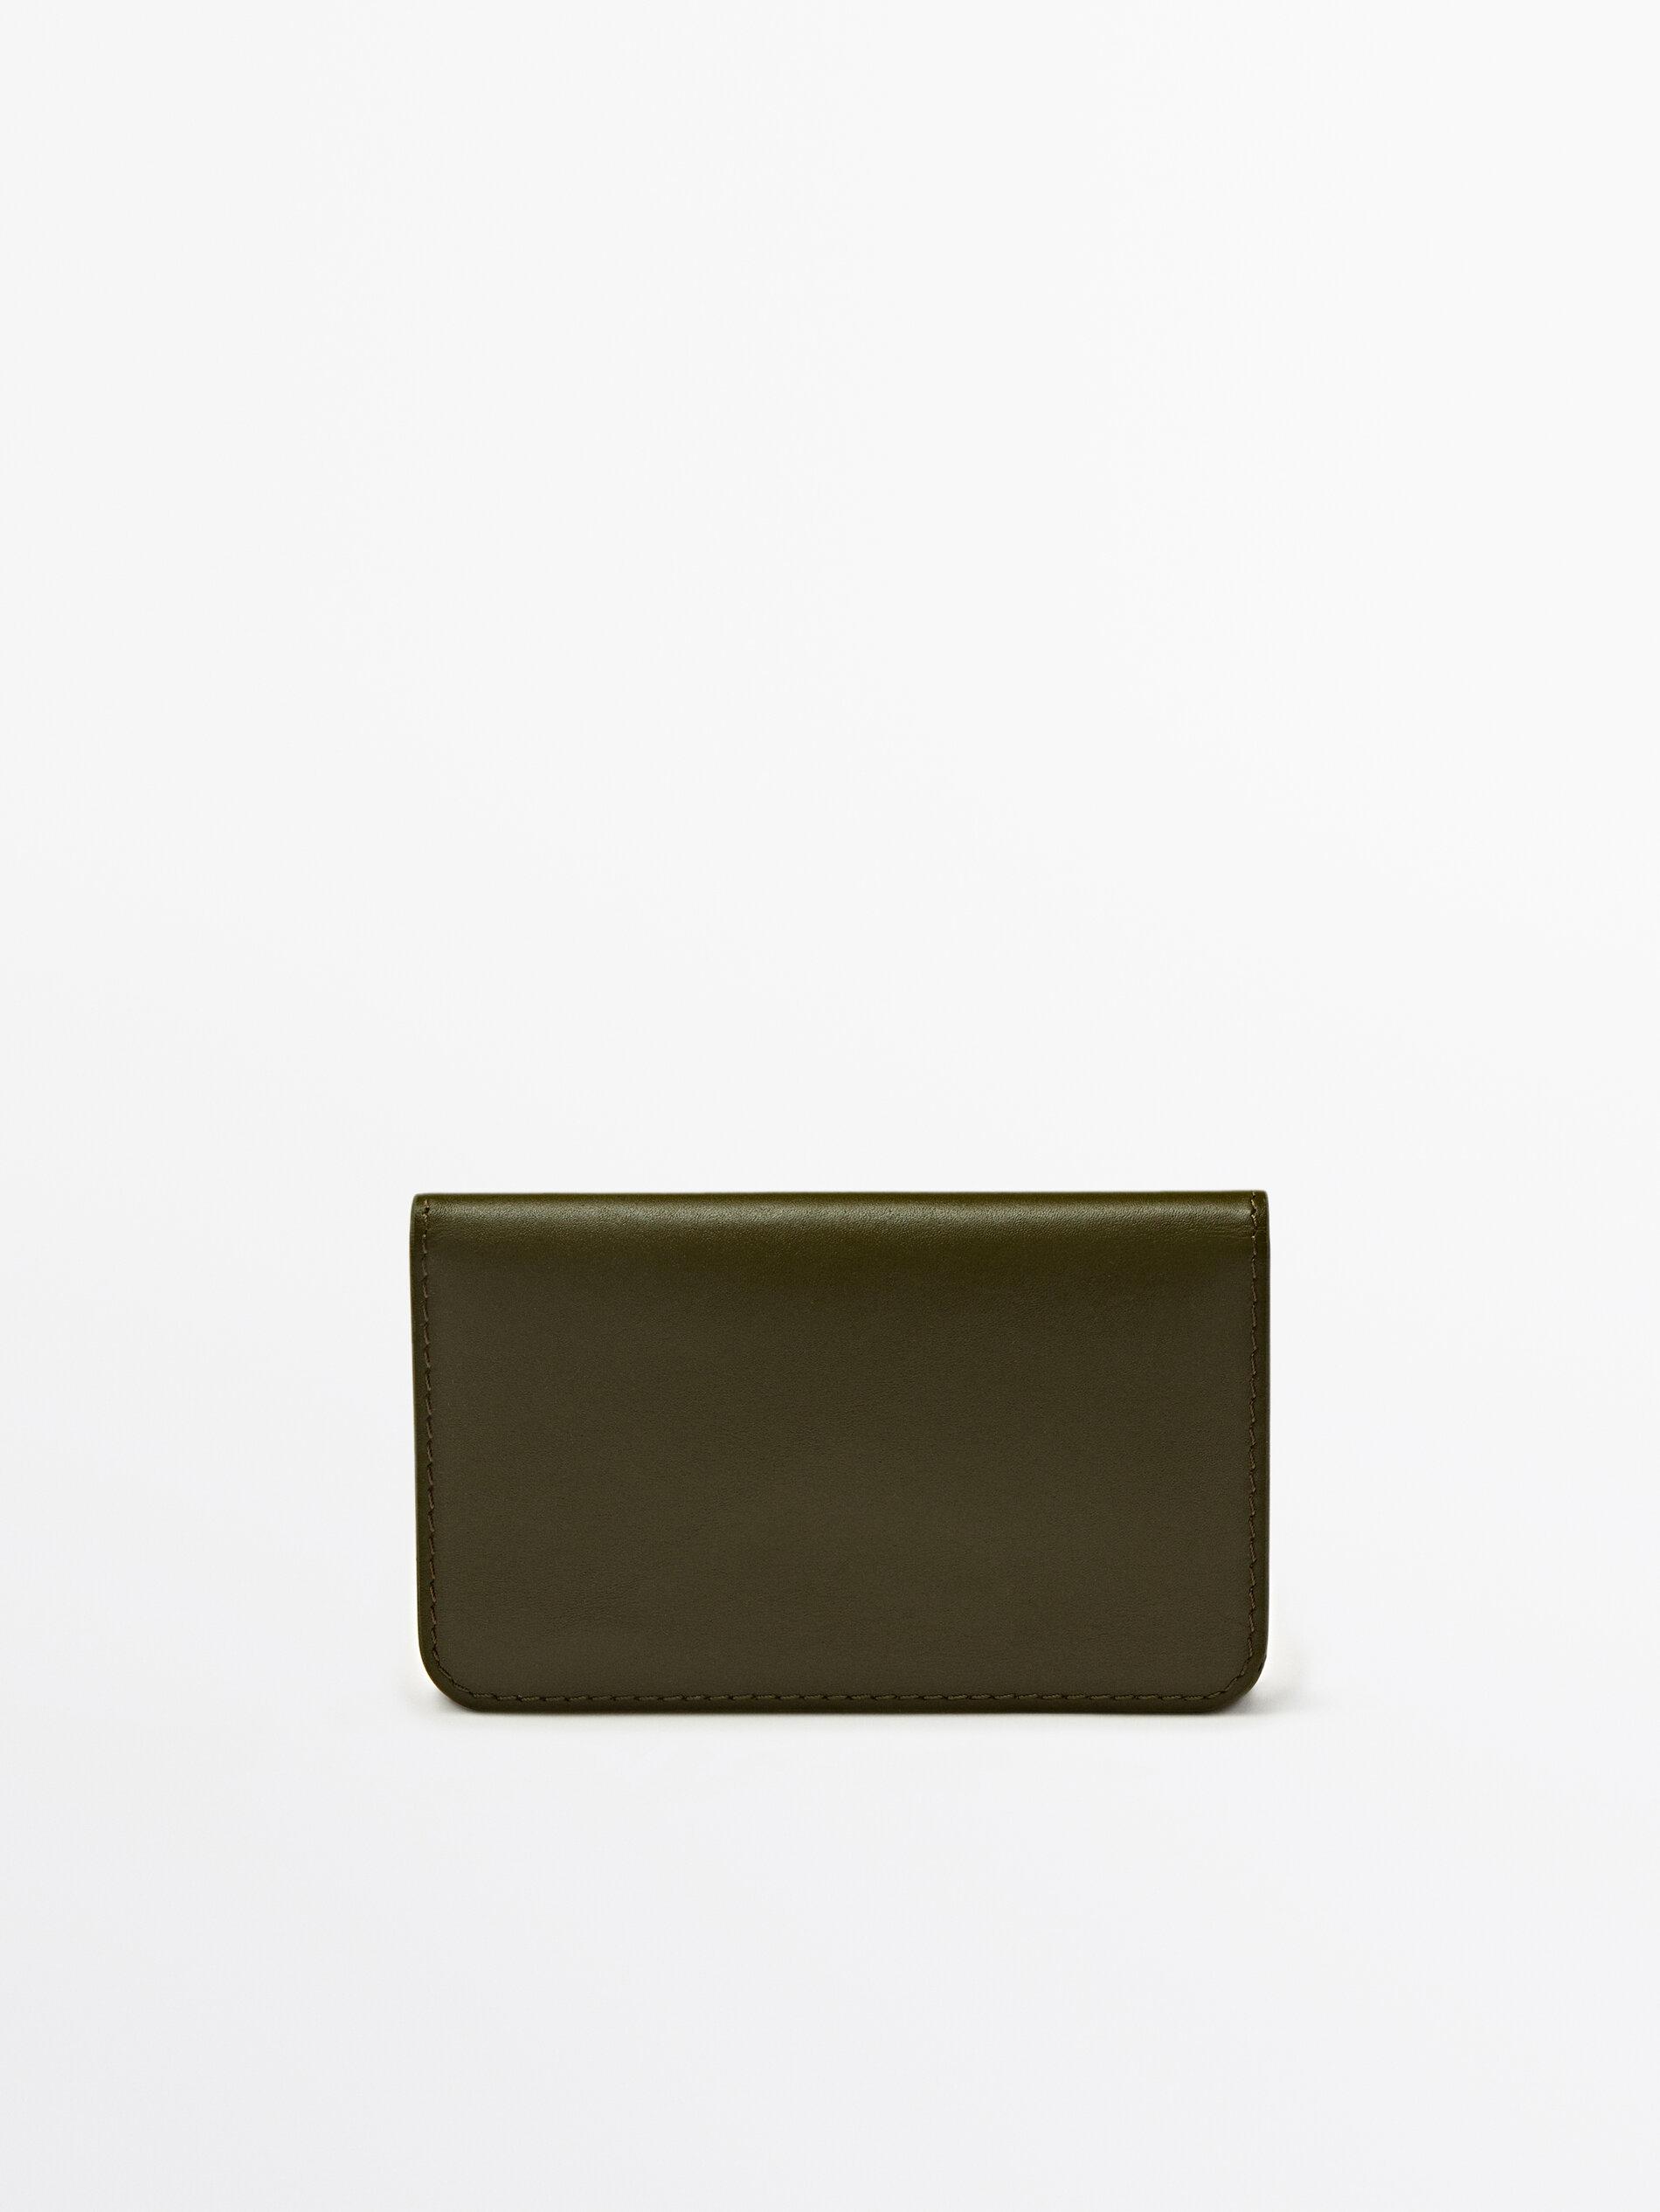 MASSIMO DUTTI Leather Wallet in Green | Lyst